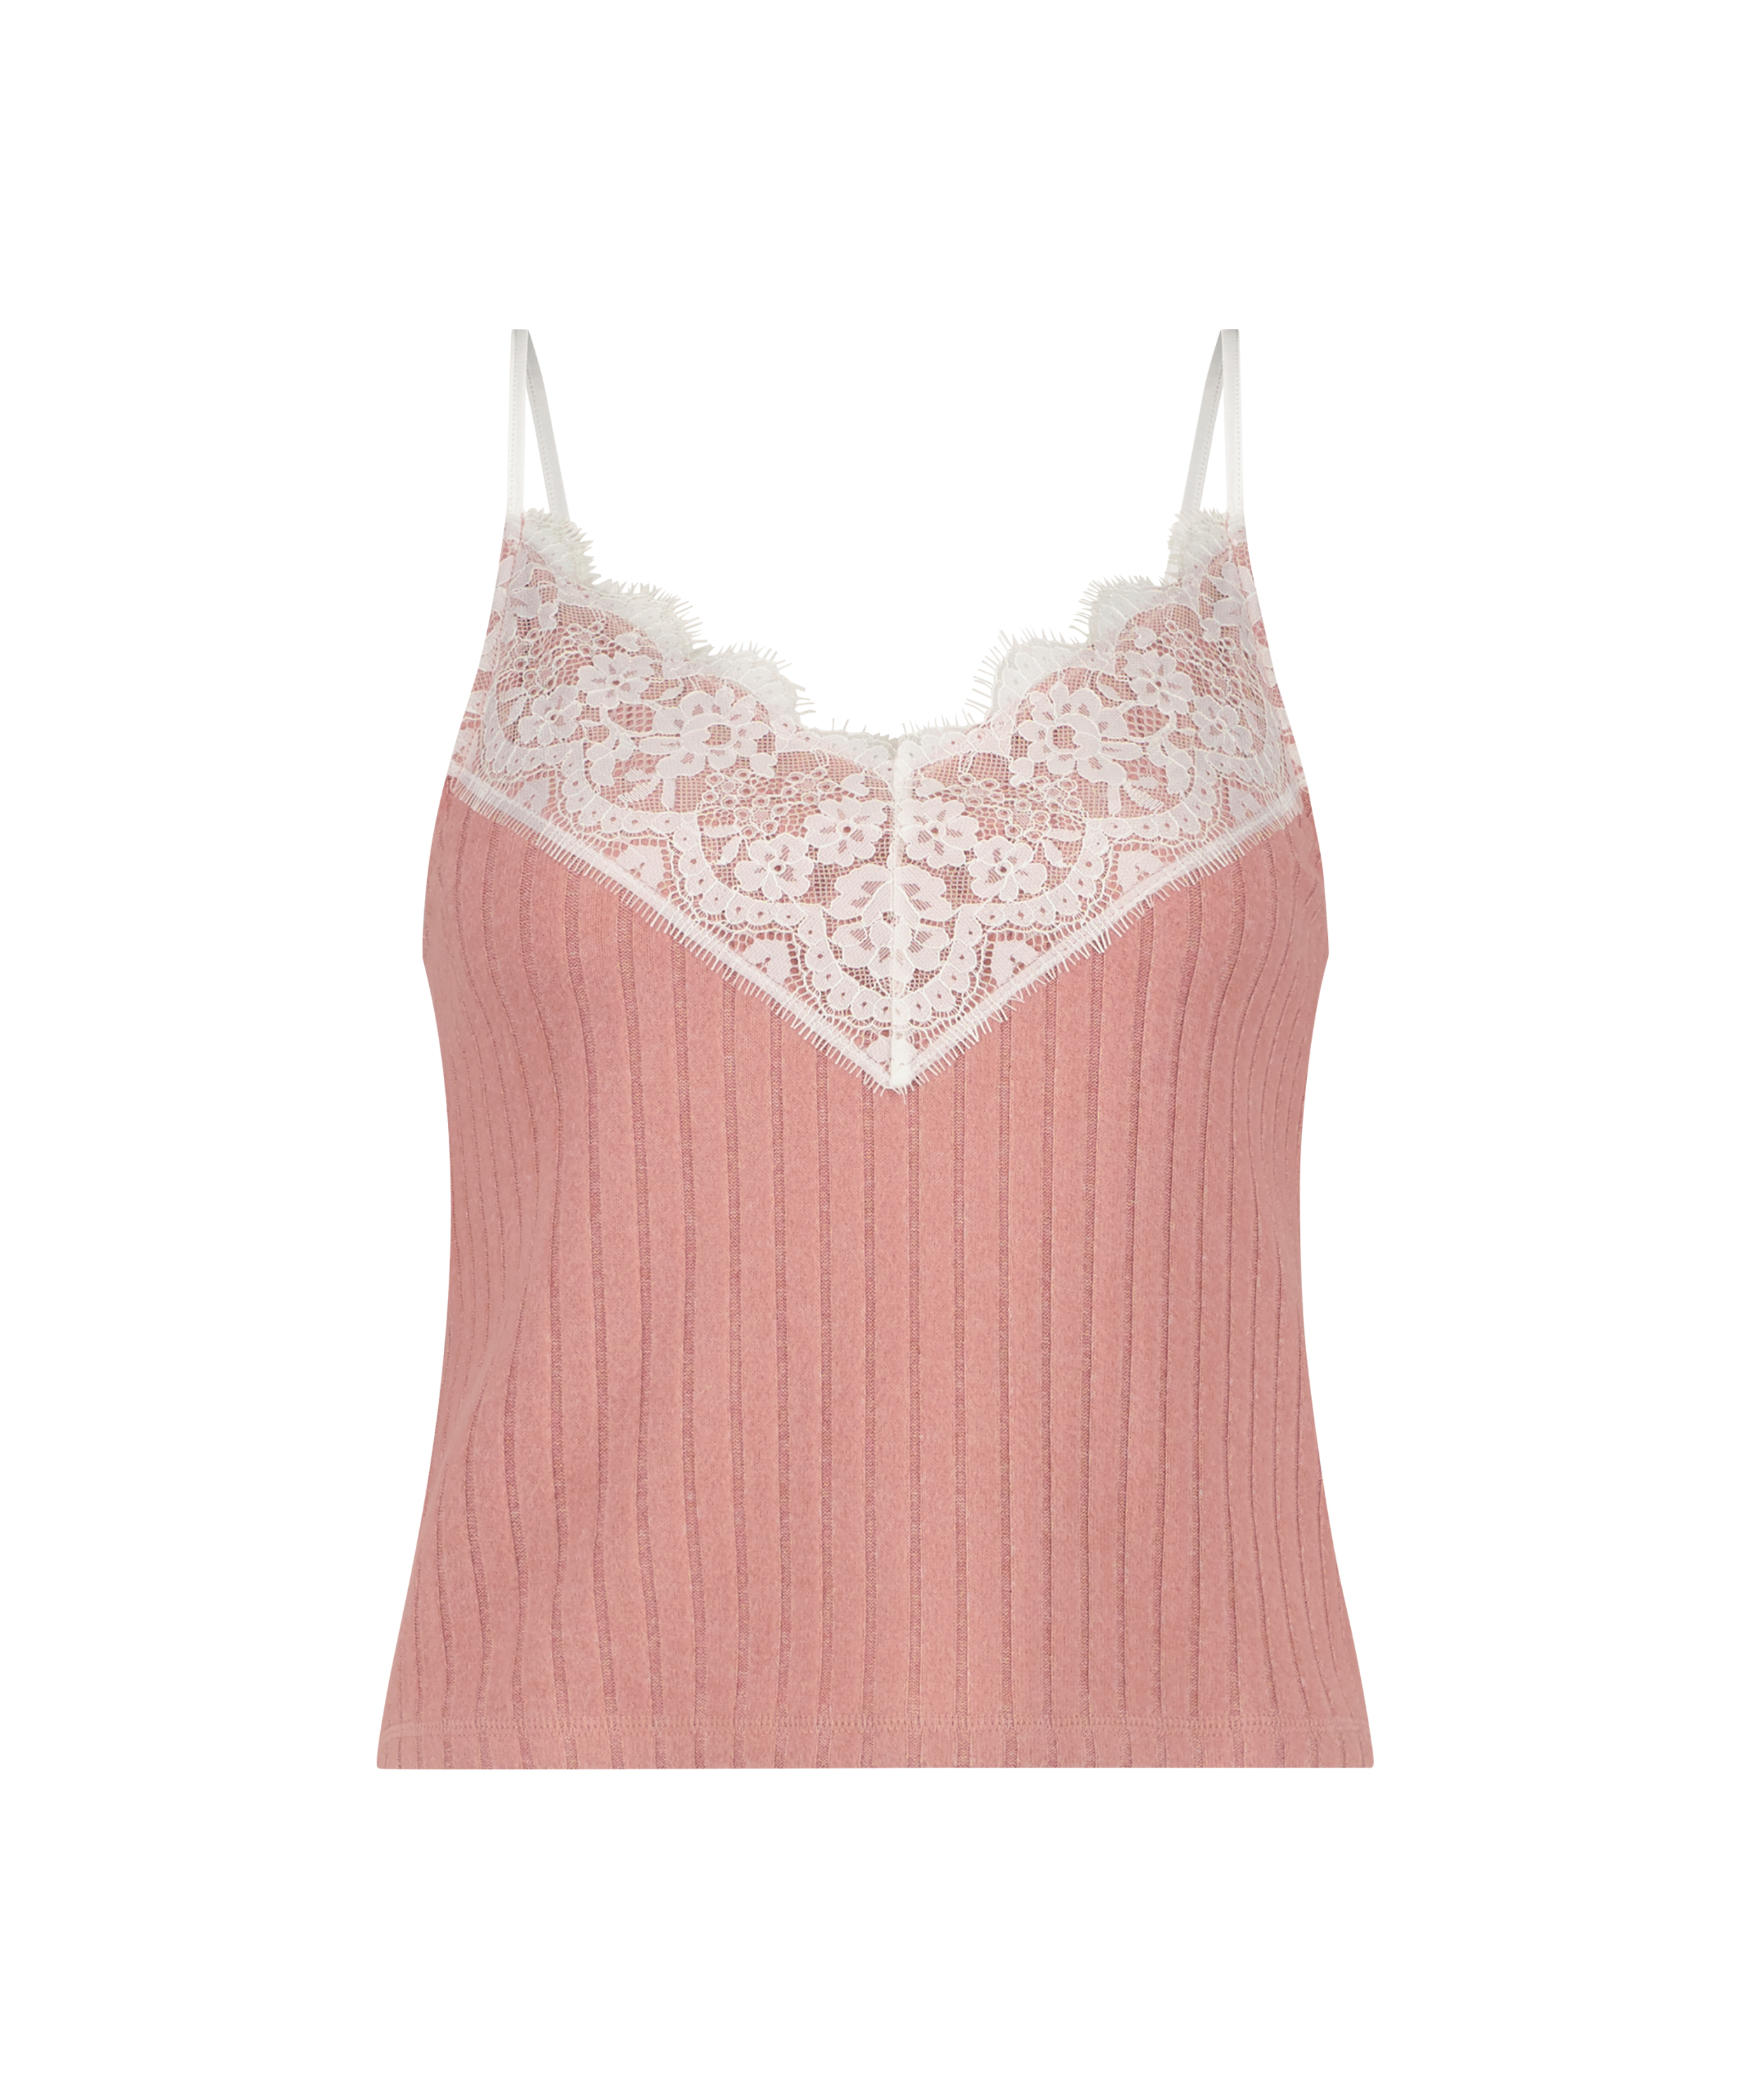 Cami top Brushed Rib Lace, Roze, main